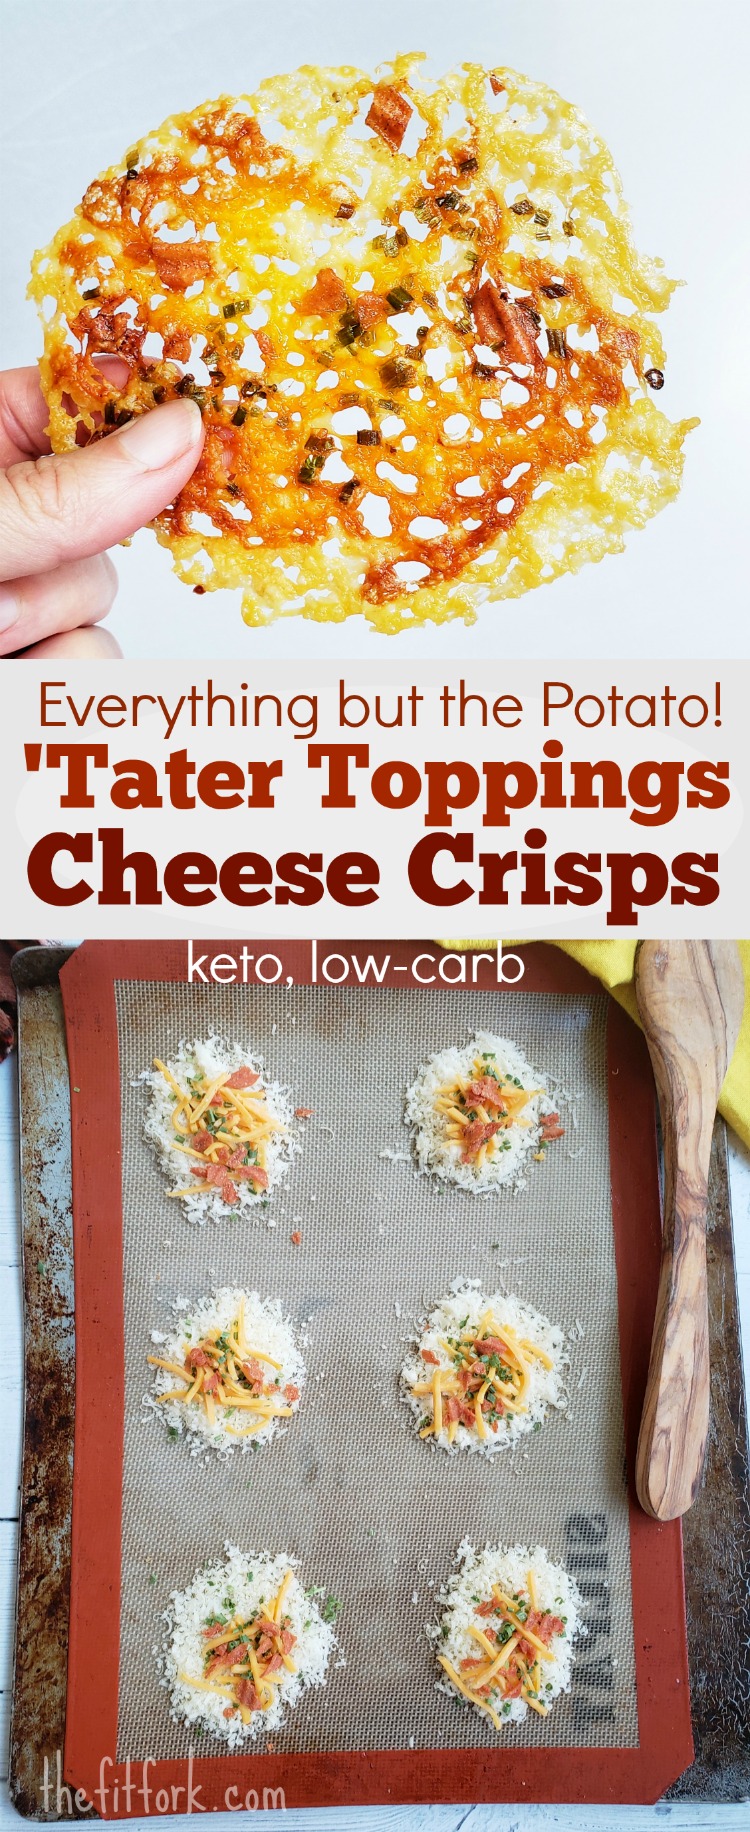 Everything but the Potato Tater Toppings Cheese Crisps are delicious and easy to make snack, fitting in with a keto diet or low carb lifestyle. 10 minutes to make, 99 calories per piece, and only 0.6 grams carbohydrate. 